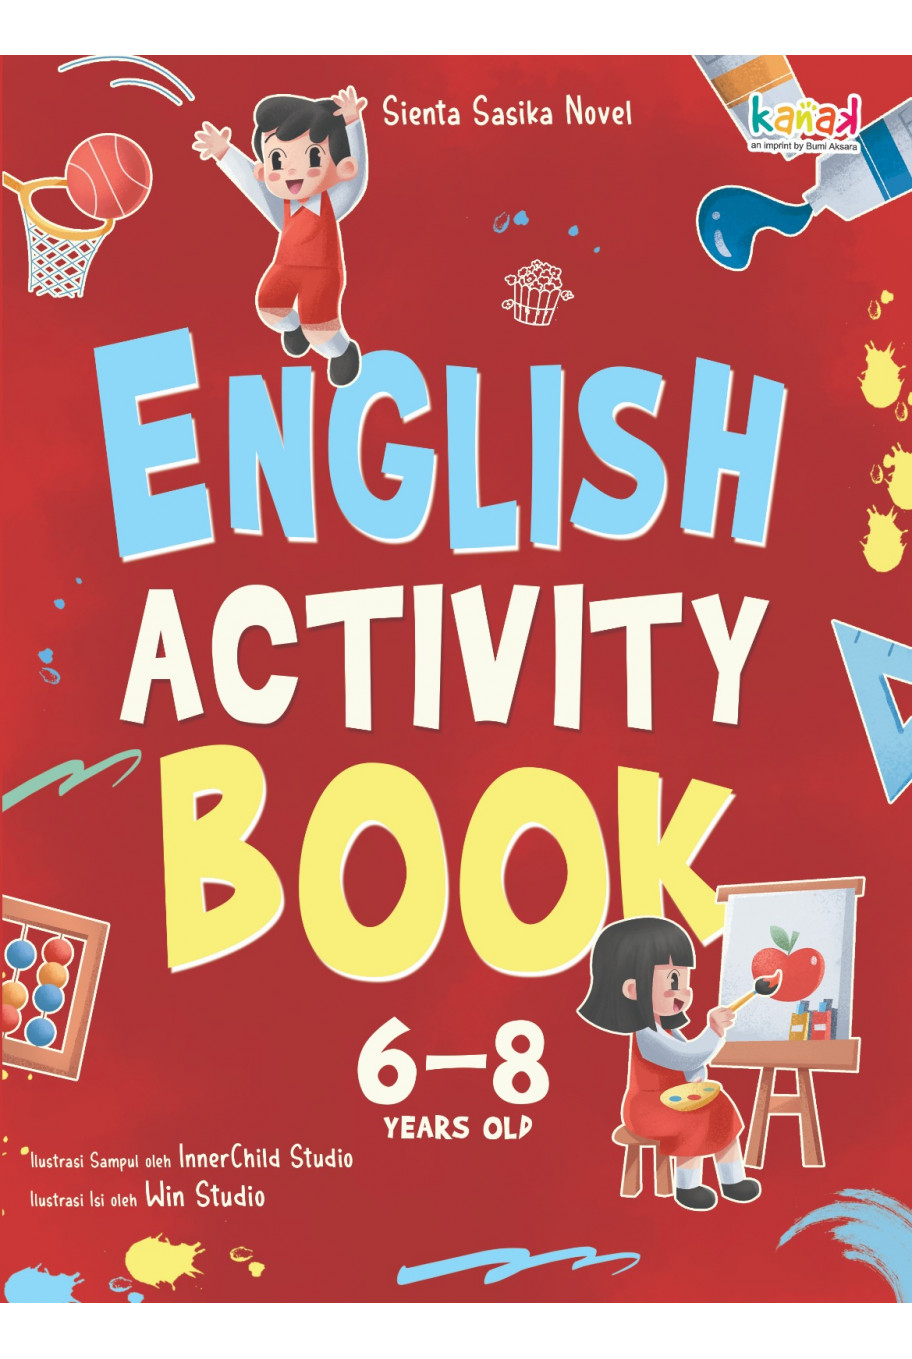 English Activity Book 6-8 Years Old